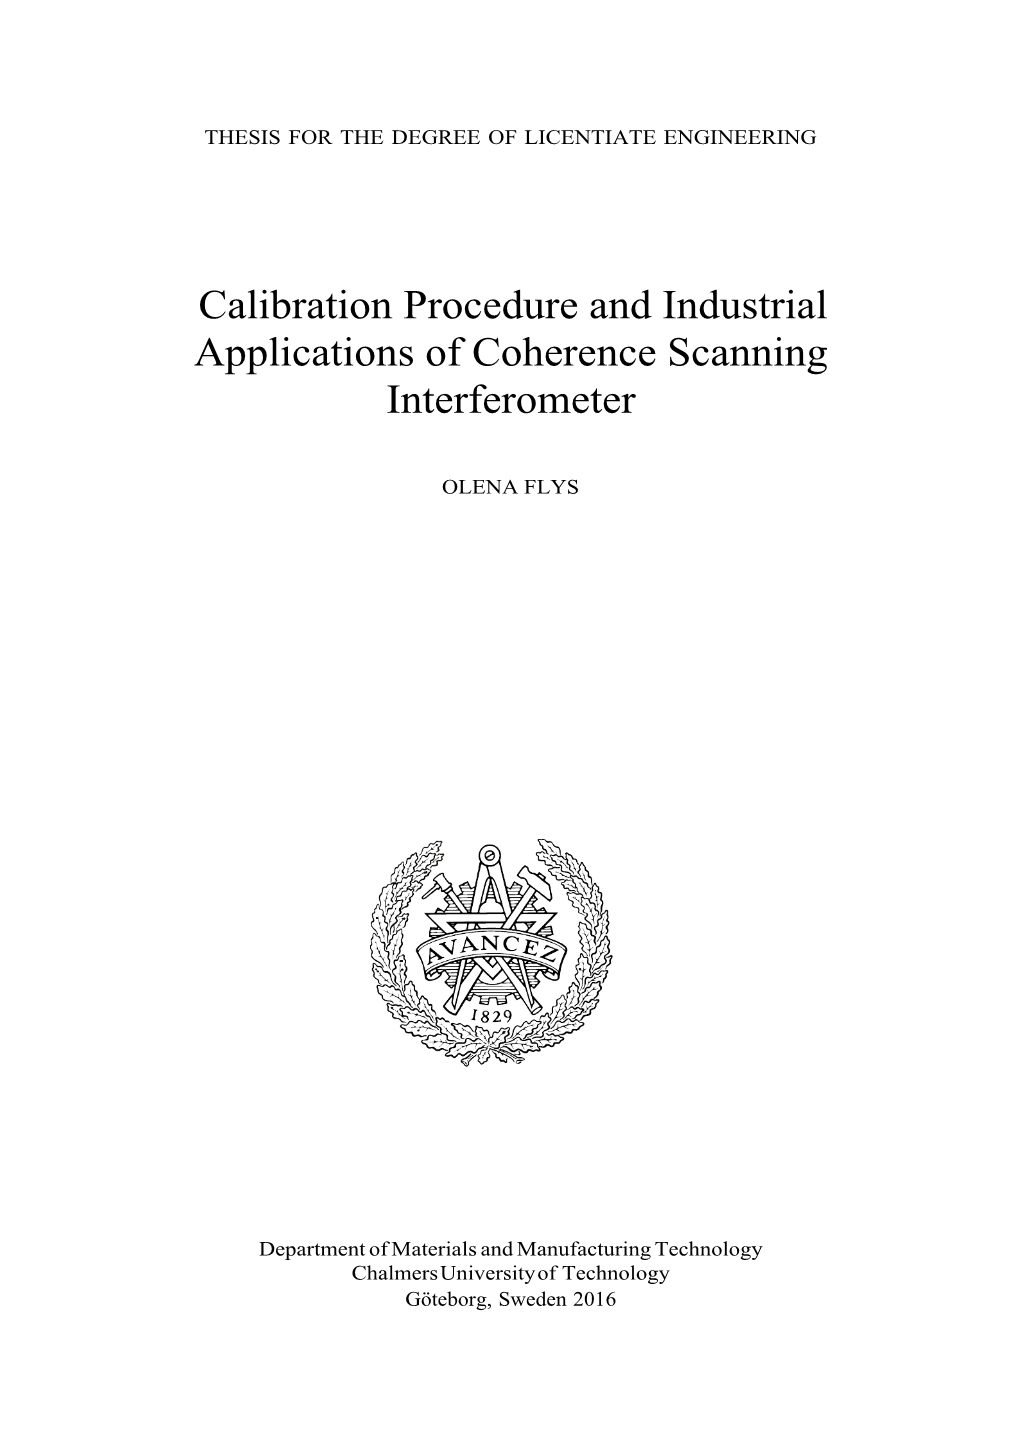 Calibration Procedure and Industrial Applications of Coherence Scanning Interferometer